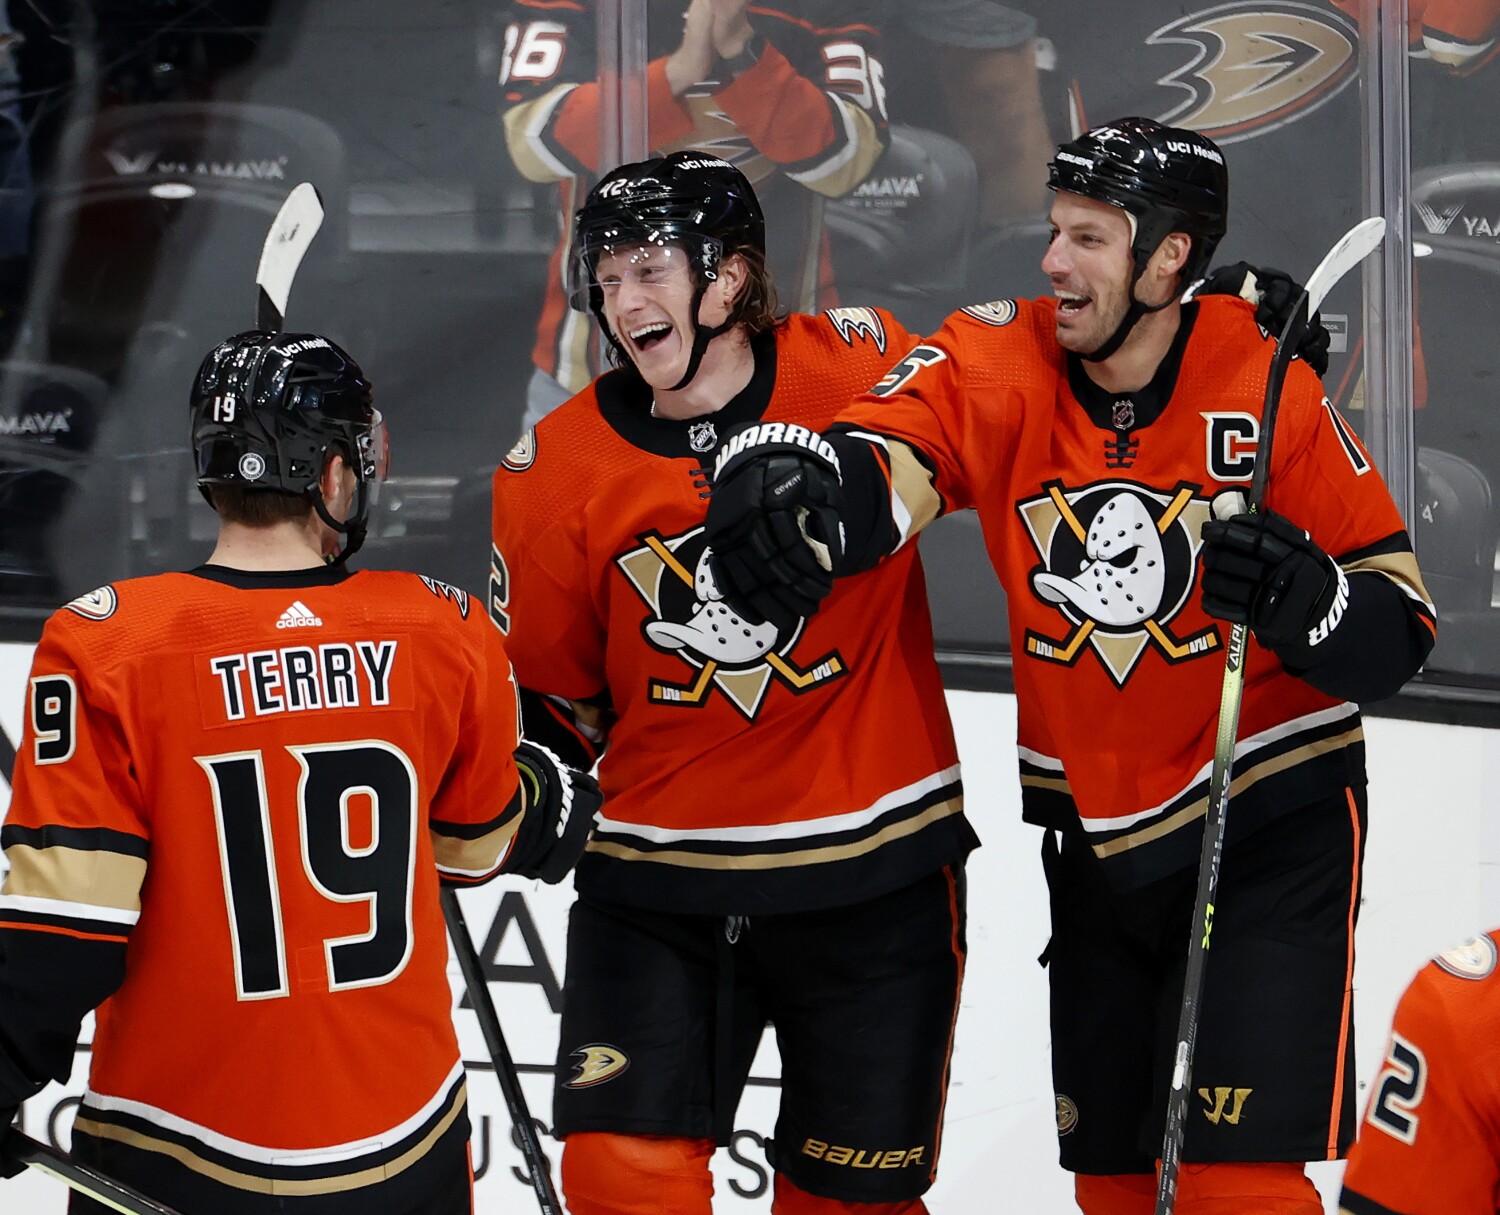 Ryan Getzlaf became the most points leader in the history of Ducks